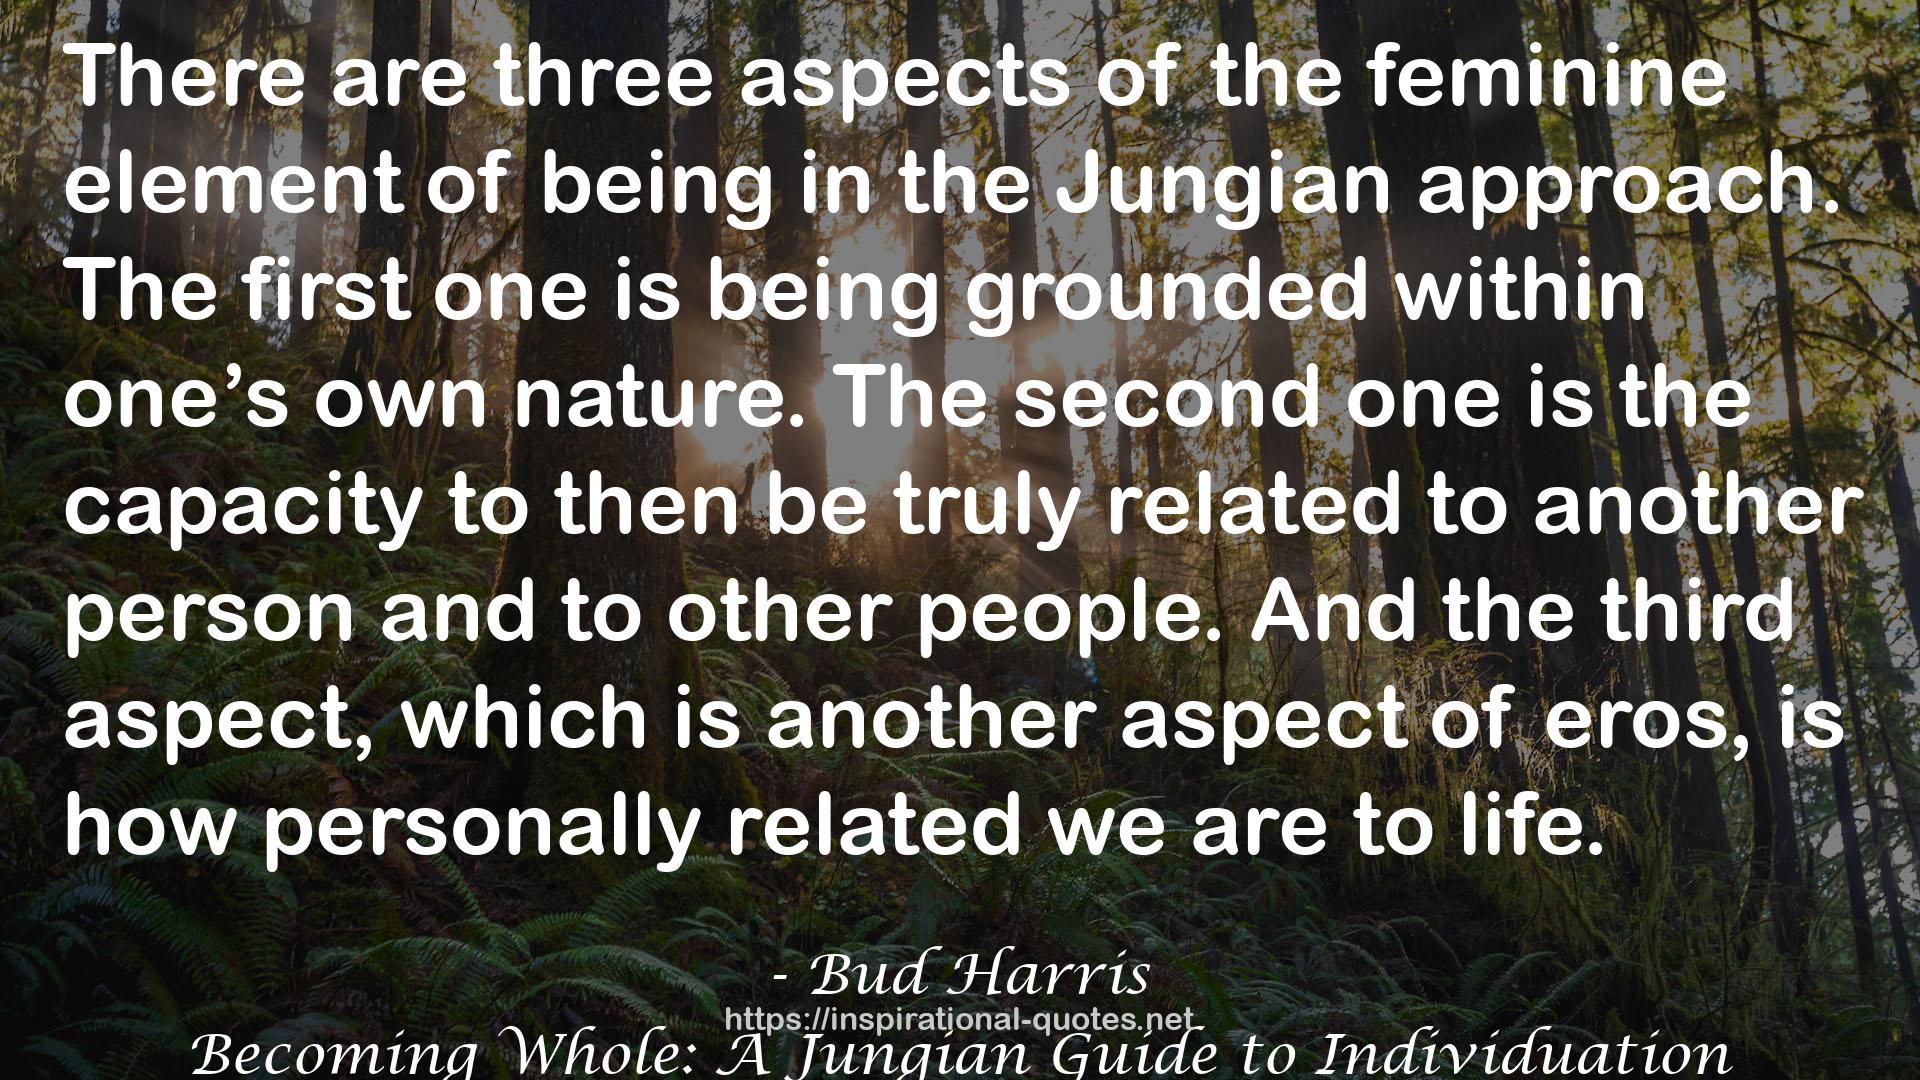 Becoming Whole: A Jungian Guide to Individuation QUOTES